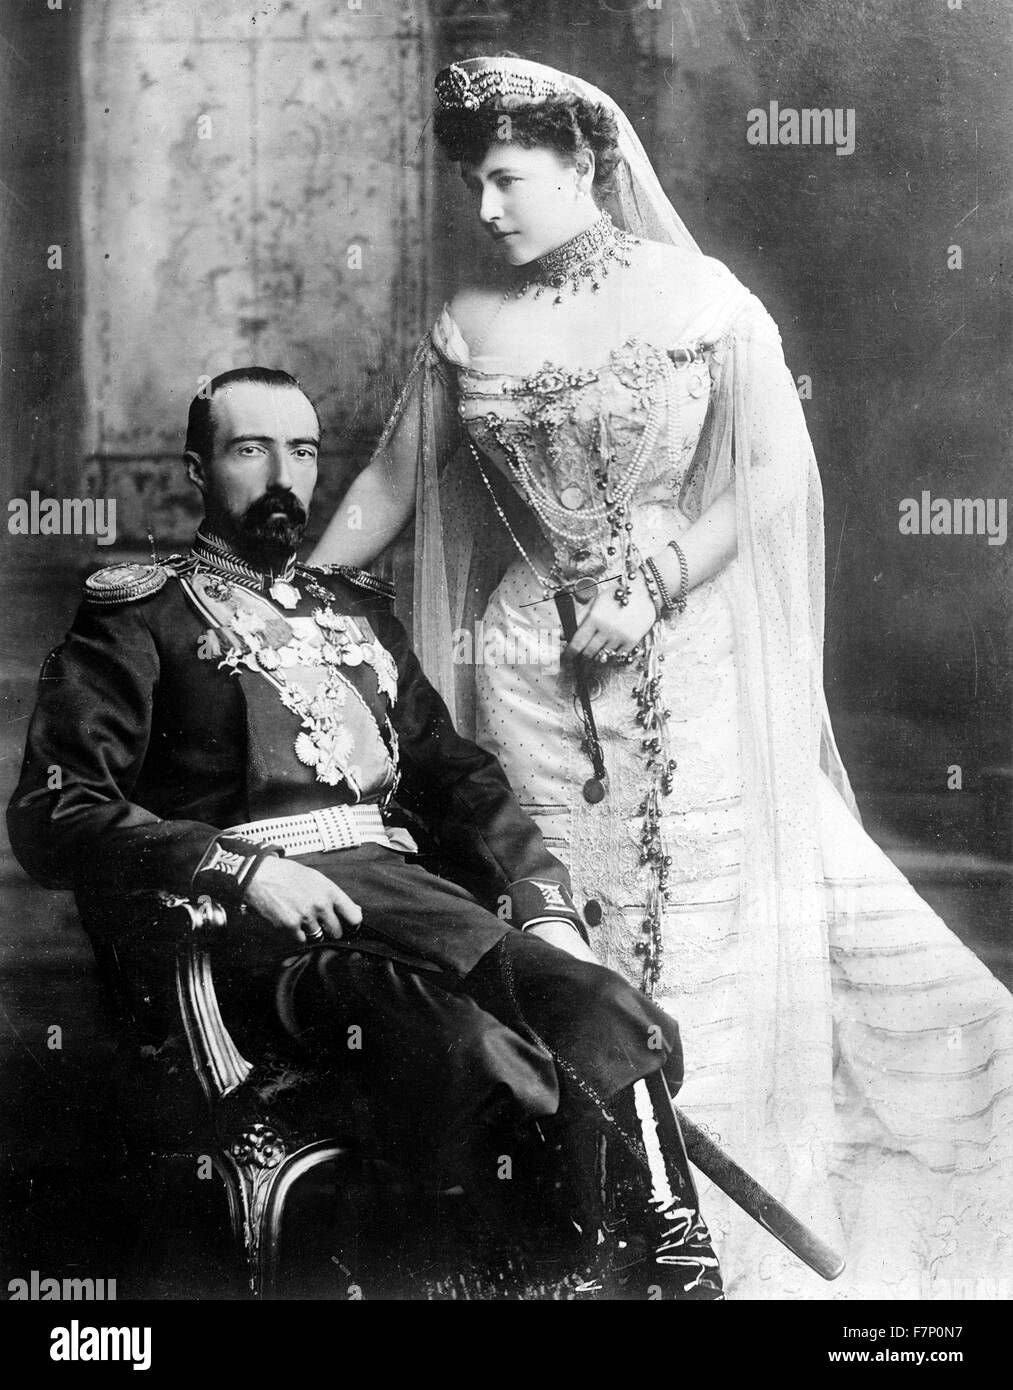 Grand Duke Michael Mikhailovich of Russia (1861-1929) and his wife Countess Sophie of Merenberg, Countess de Torbay (1868-1927) Stock Photo